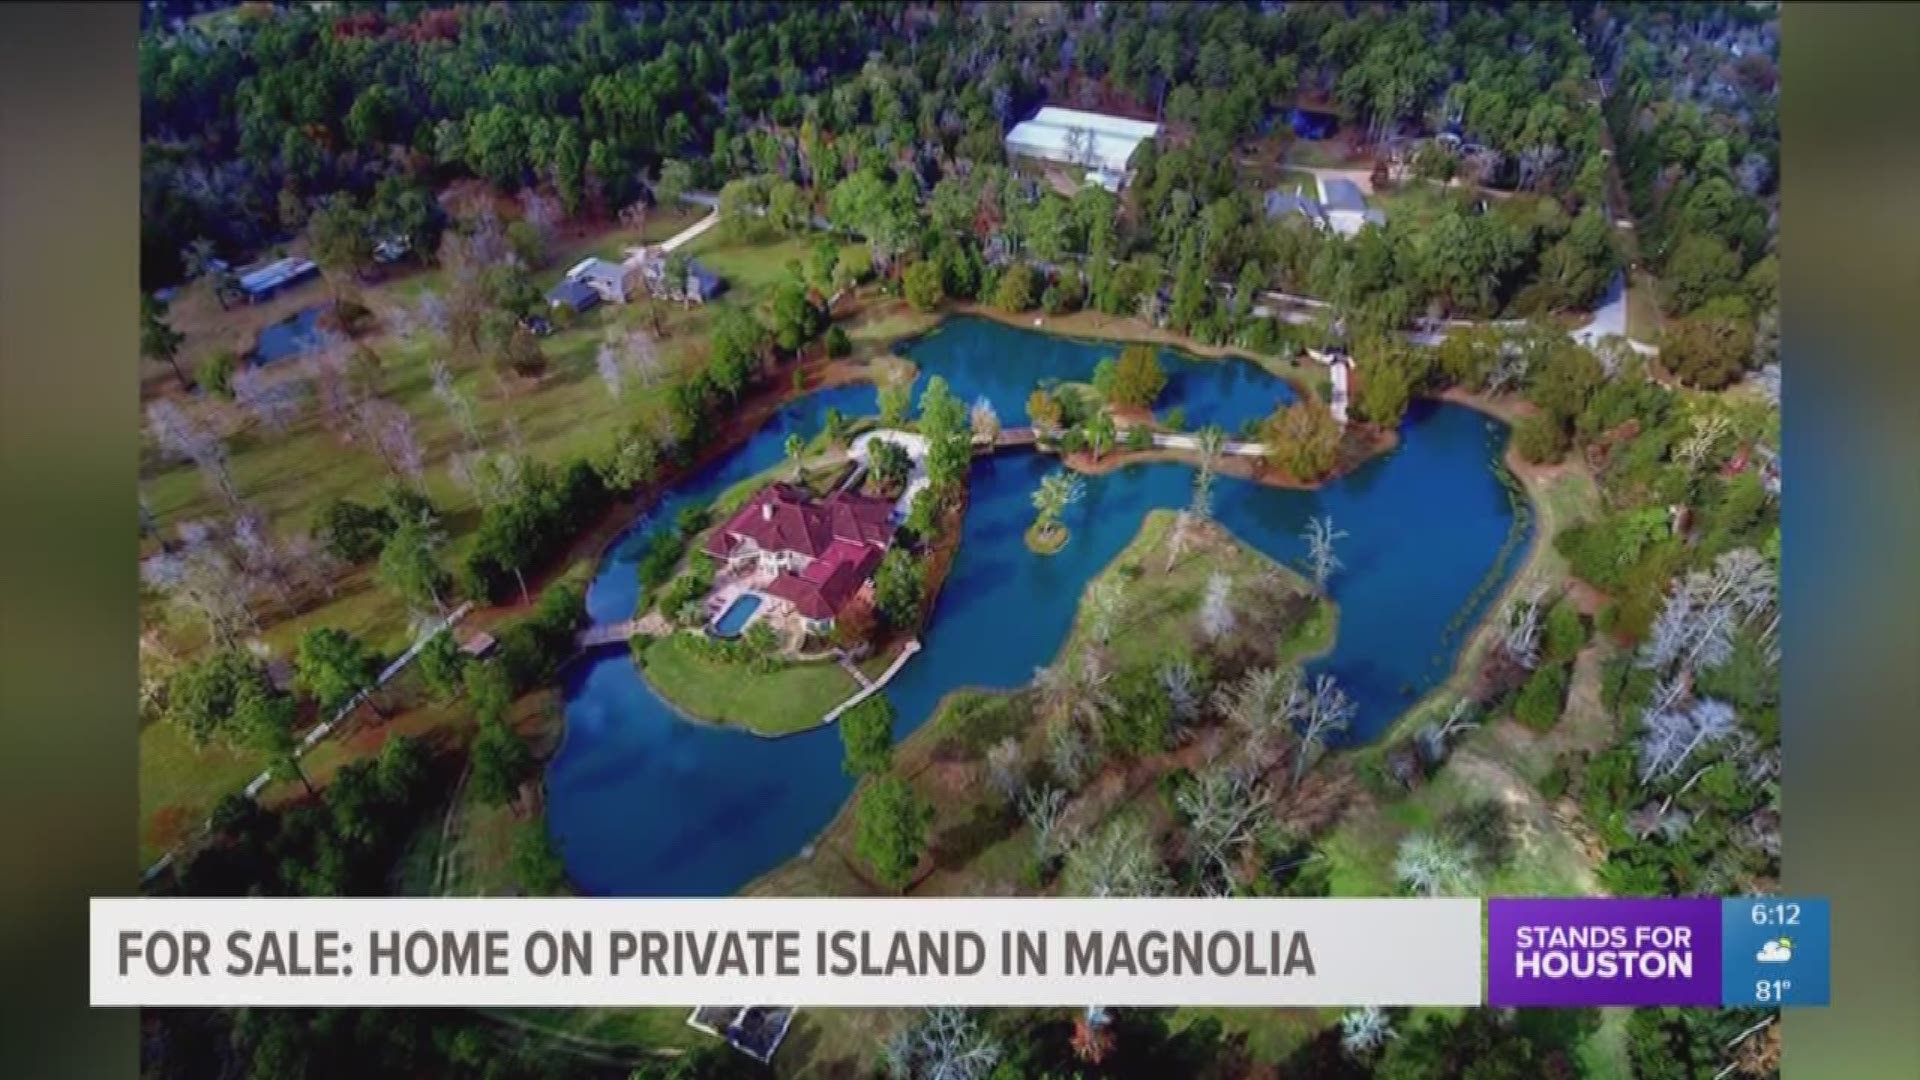 This home for sale in Magnolia is on its own little island.